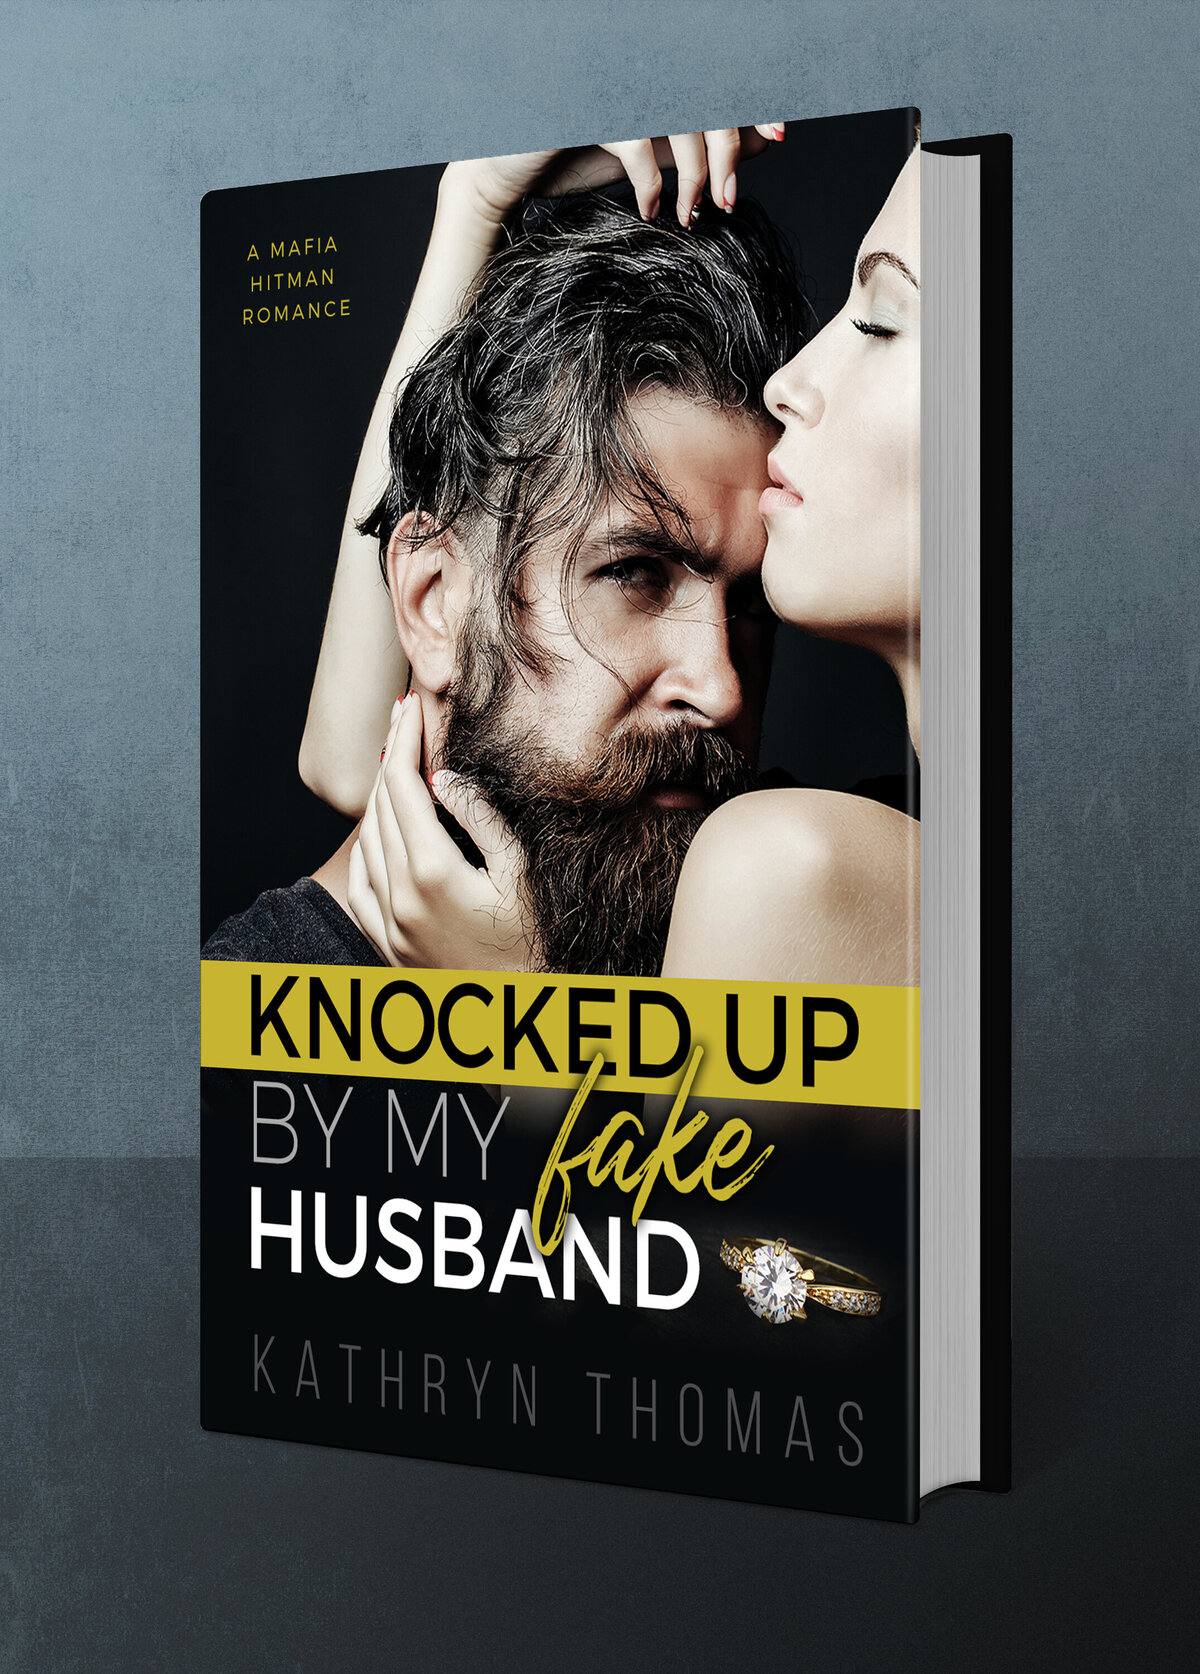 Knocked Up by My Fake Husband by Kathryn Thomas